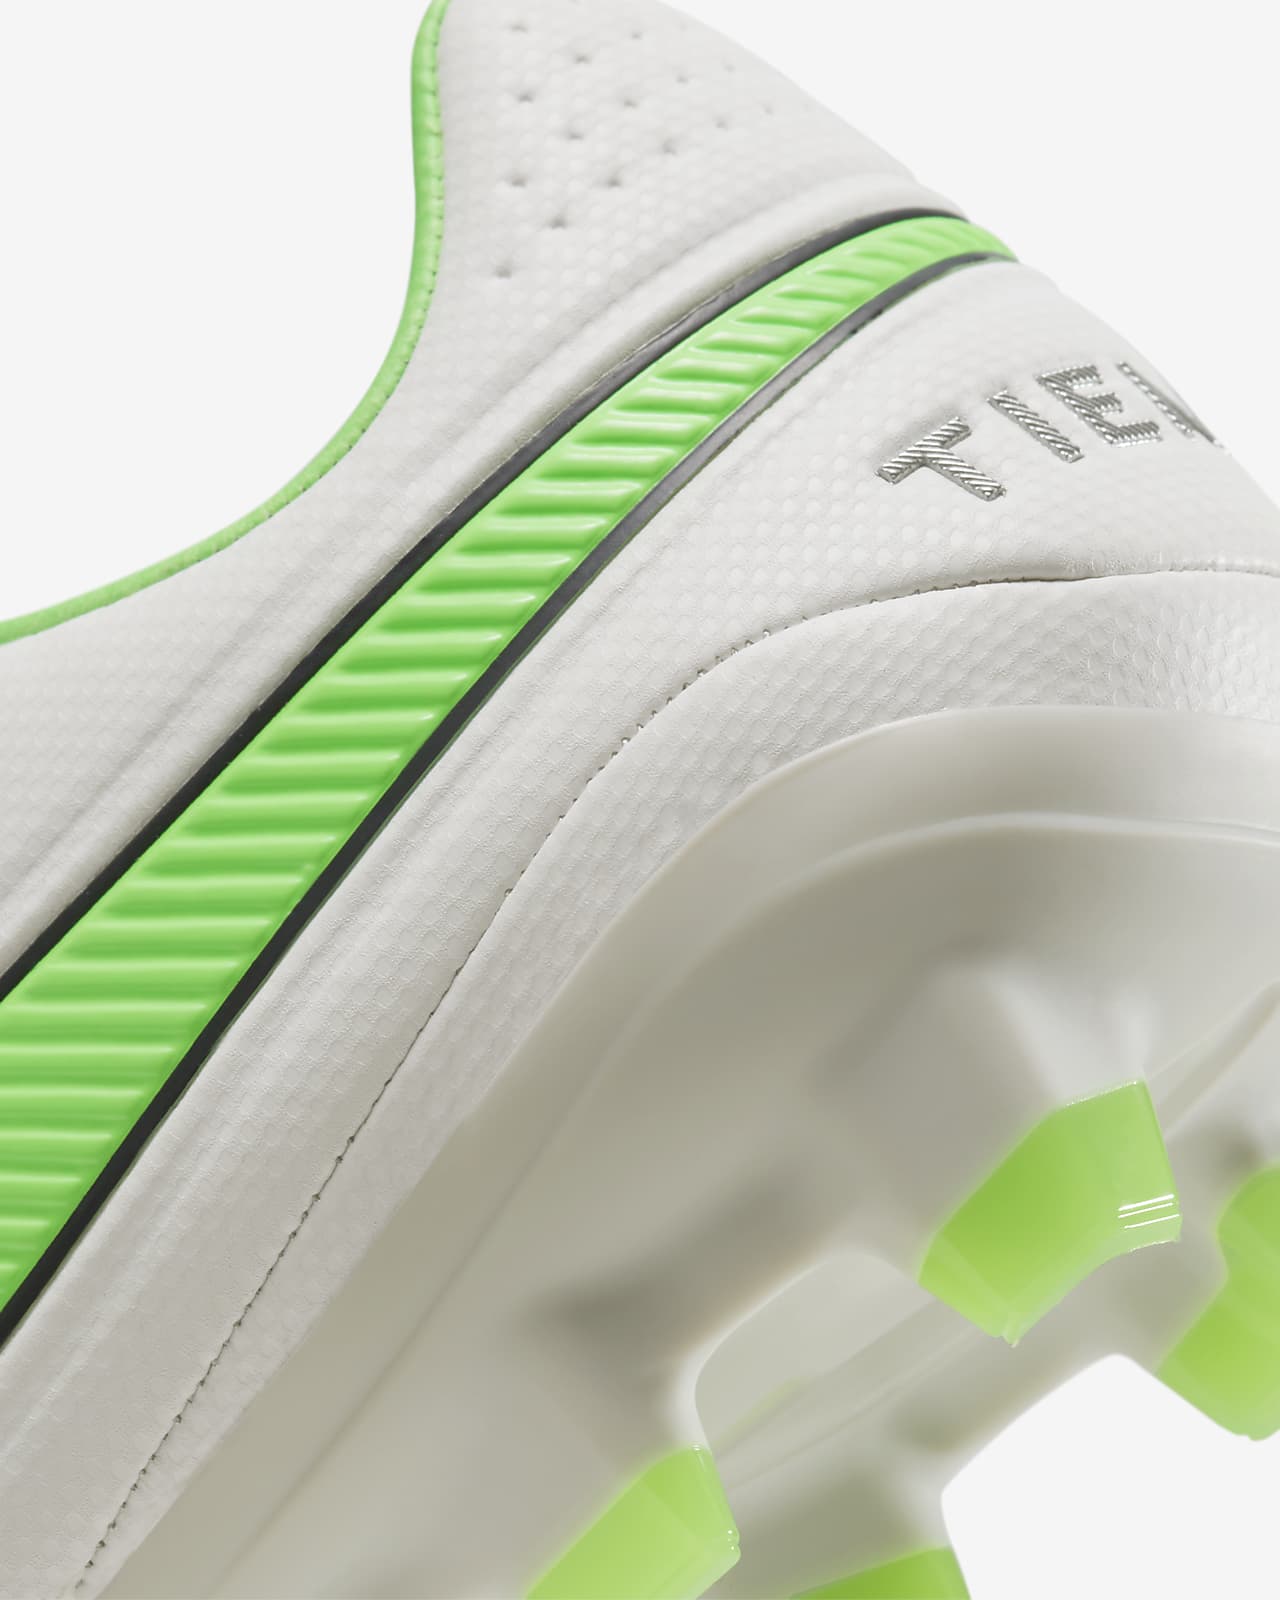 white and green nike soccer cleats